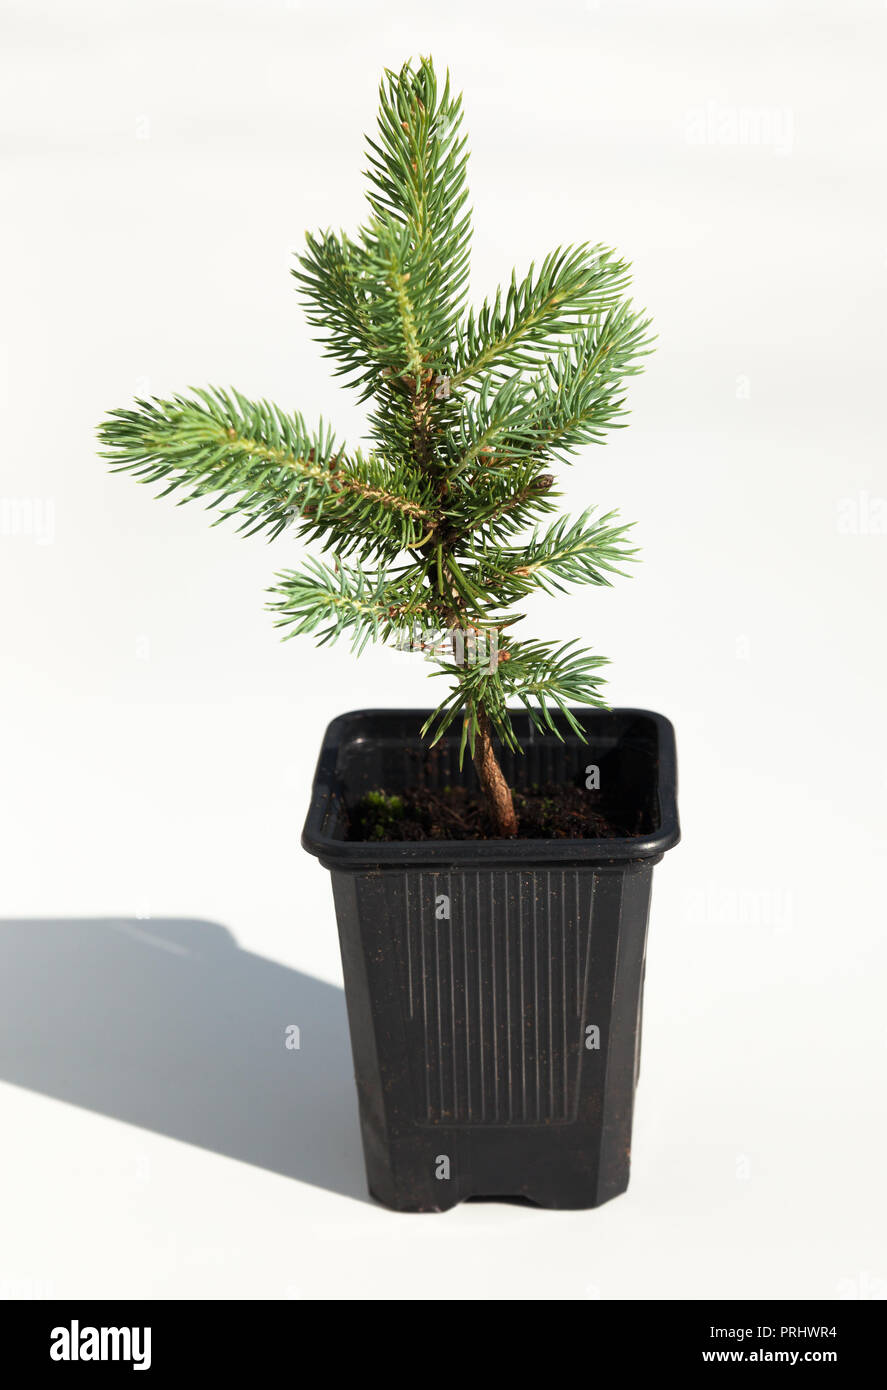 Christmas tree in a pot. Stock Photo